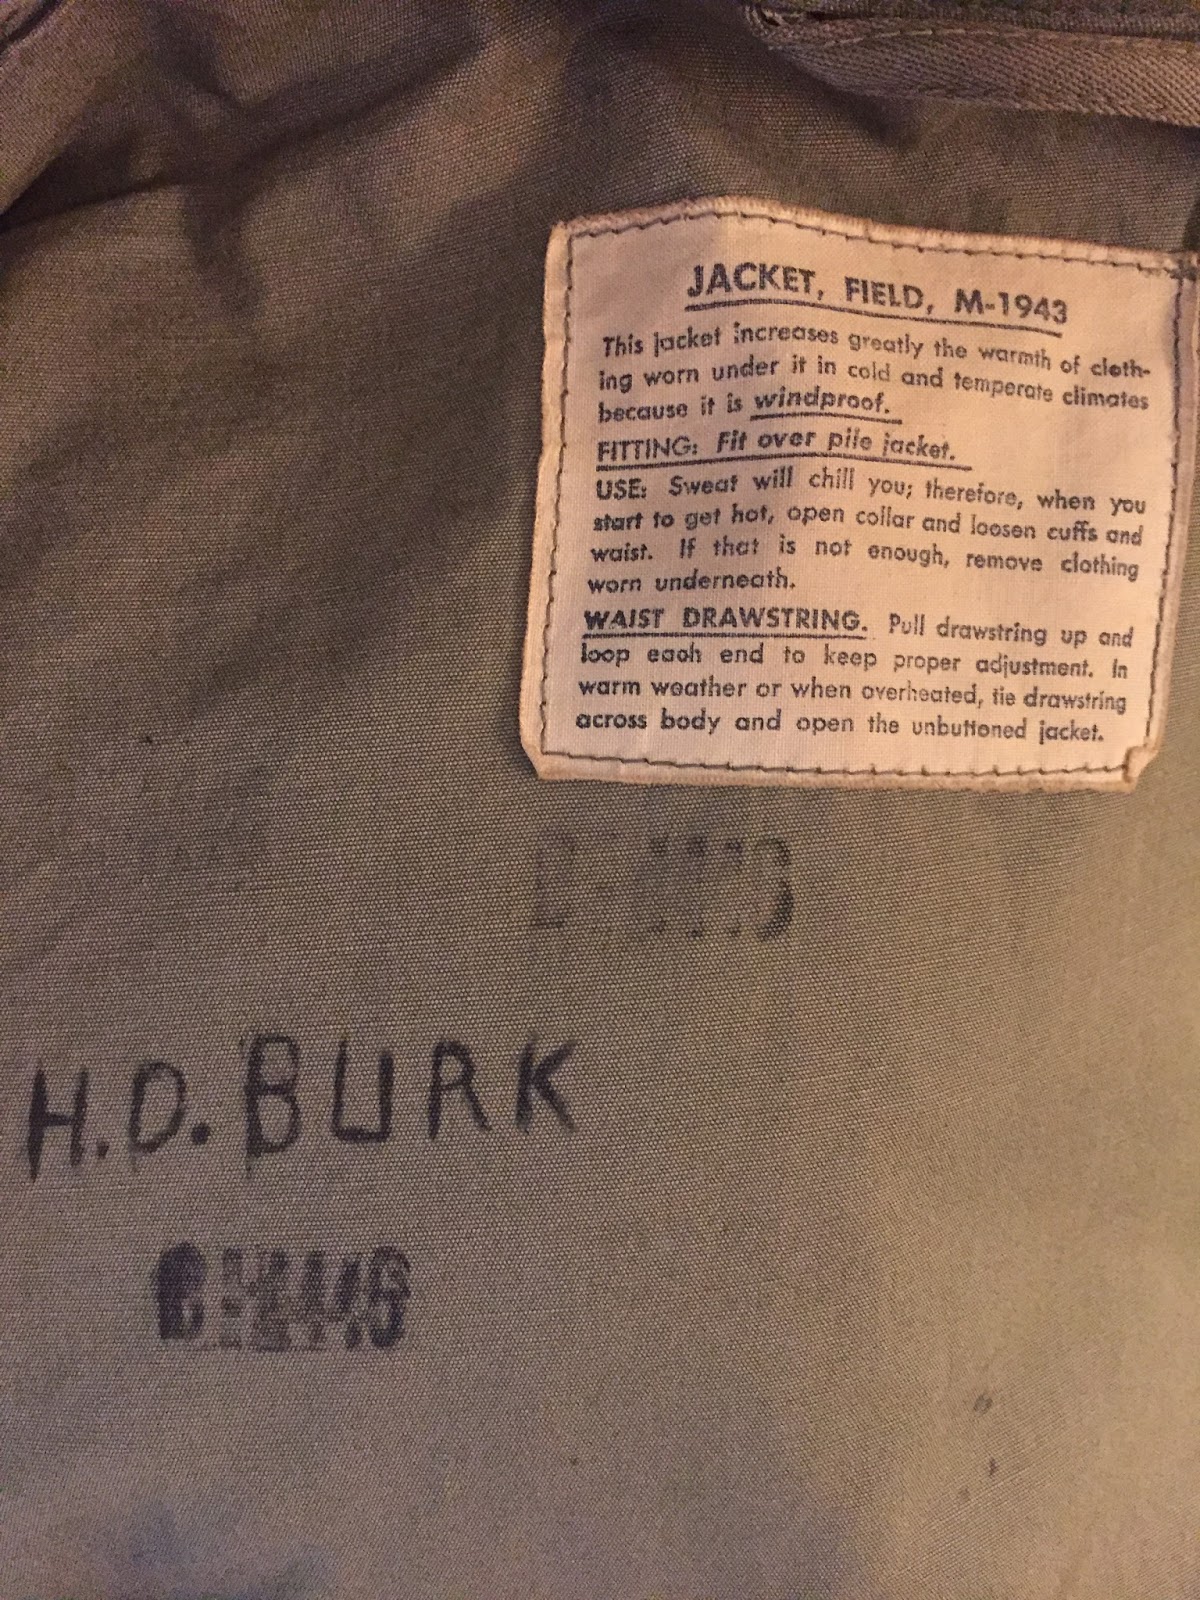 Climbing My Family Tree: Military Monday: Is This Dad's WWII Jacket?